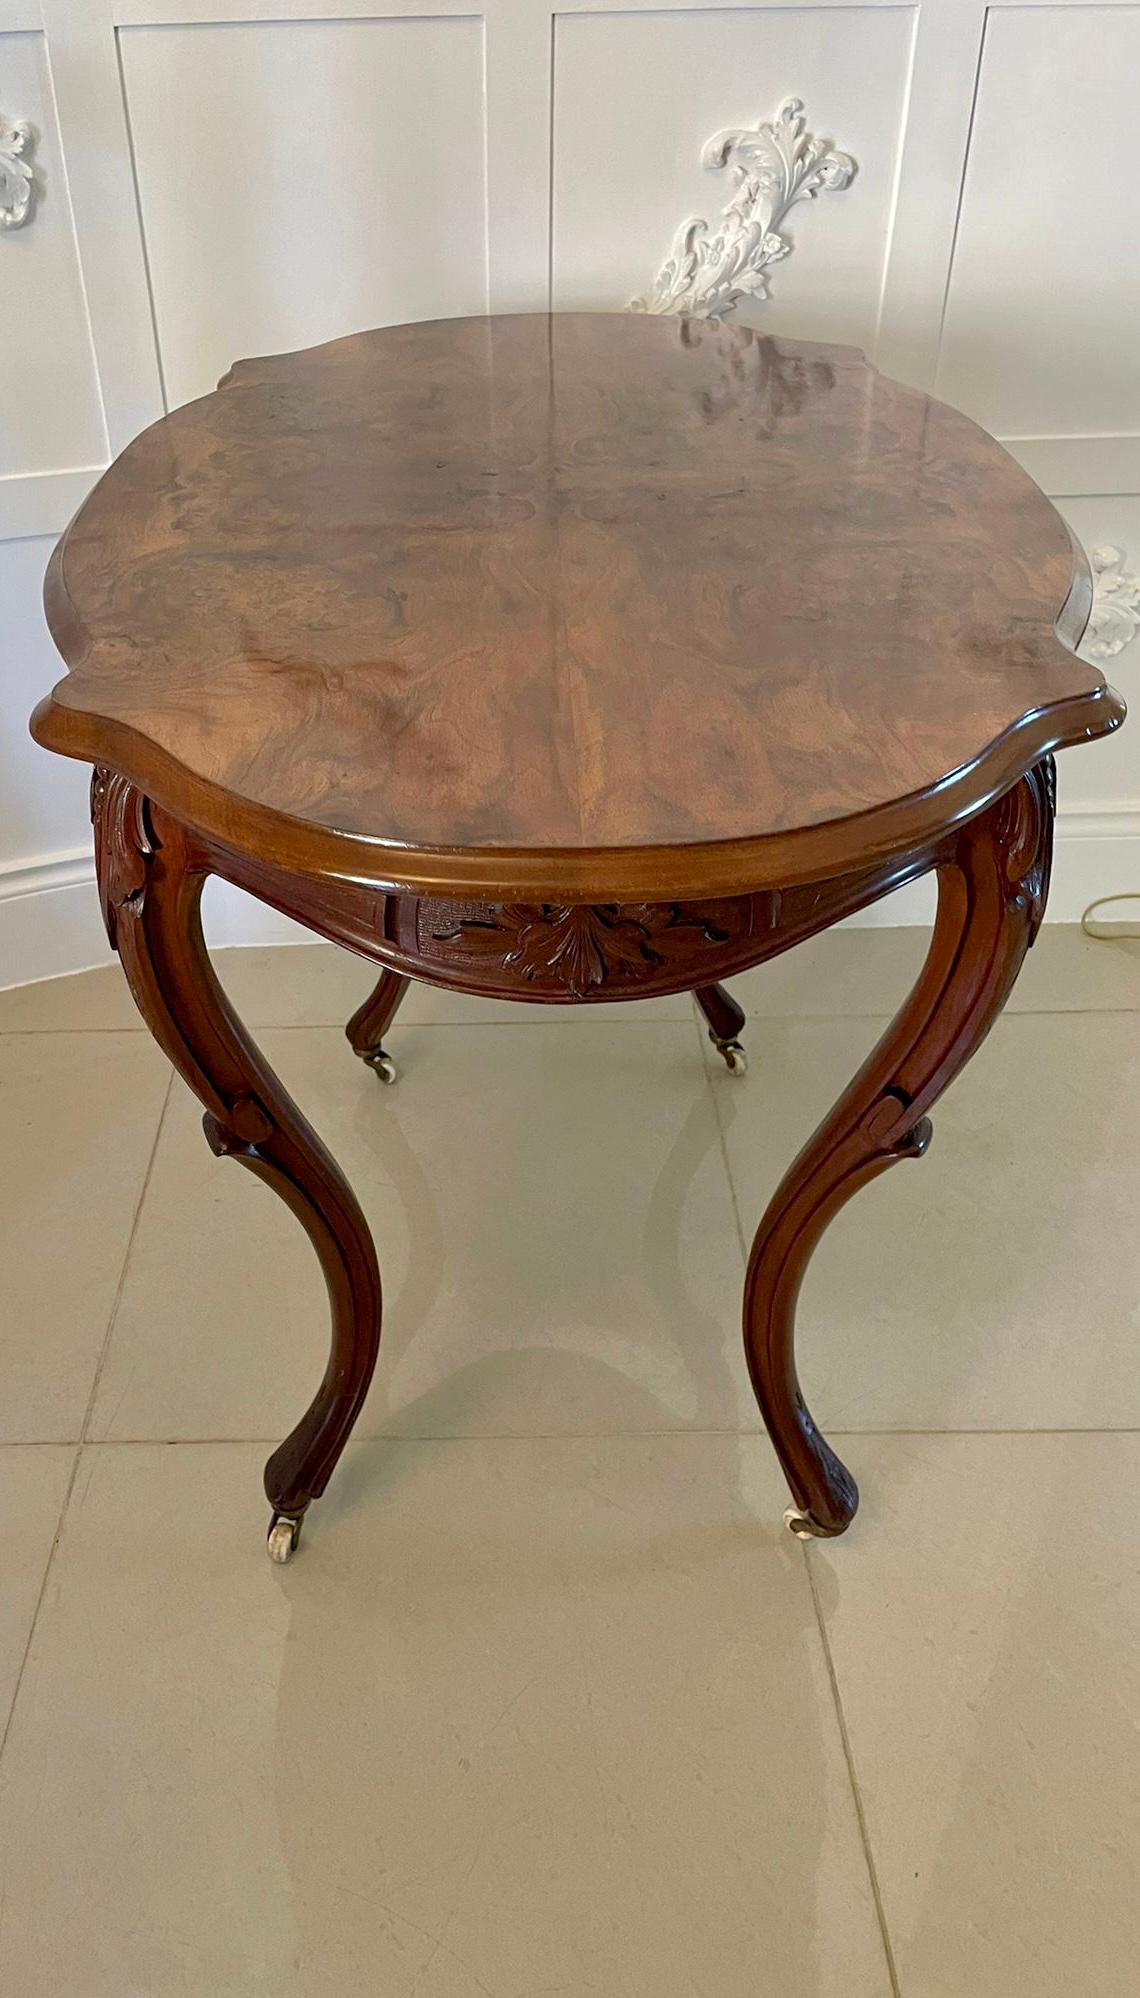 Antique Victorian Quality Freestanding Burr Walnut Centre Table In Good Condition For Sale In Suffolk, GB